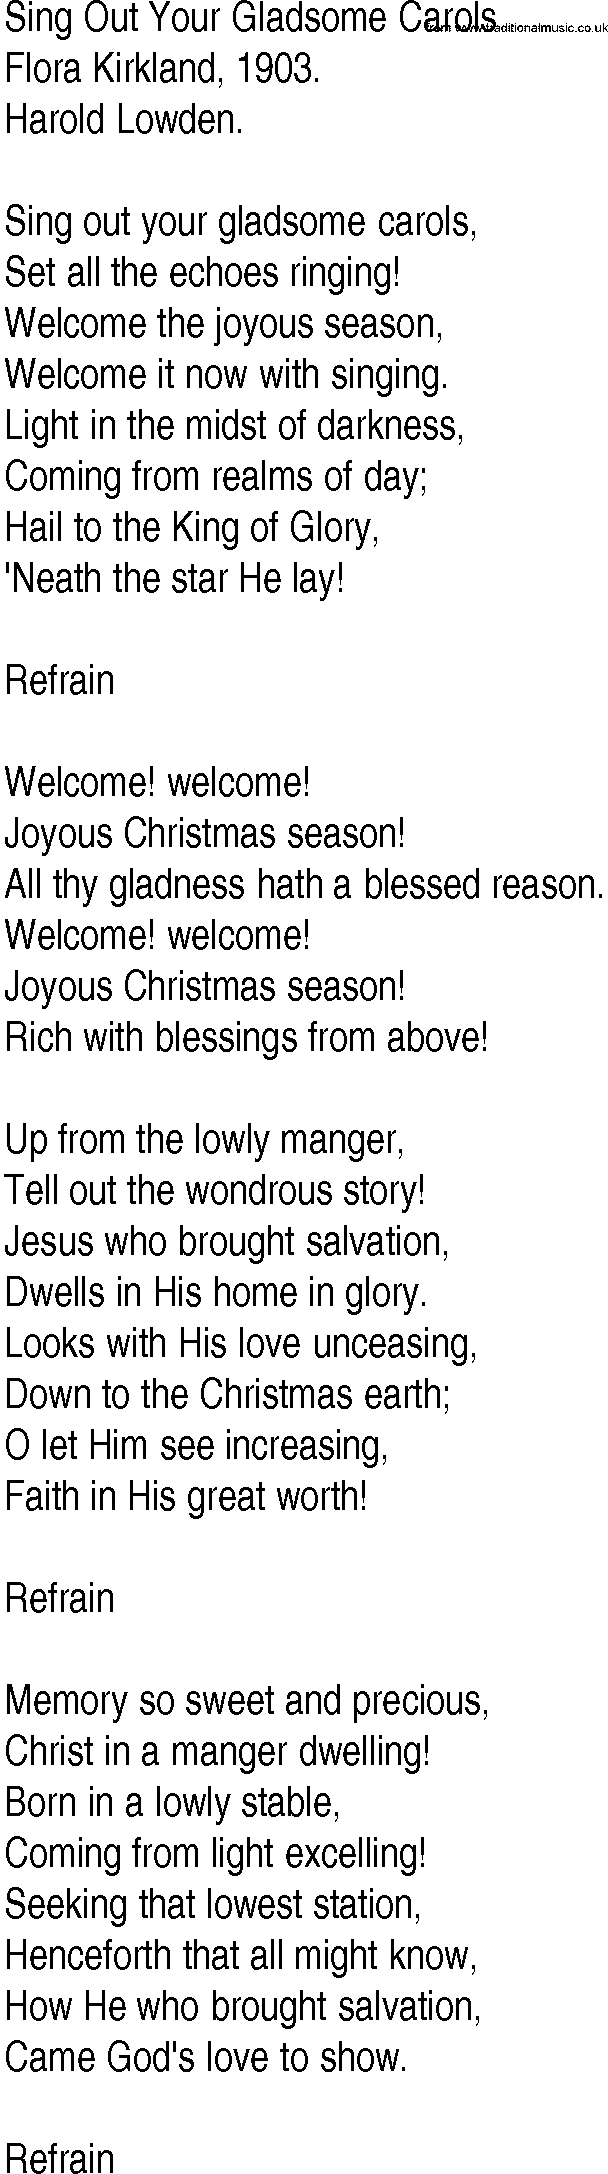 Hymn and Gospel Song: Sing Out Your Gladsome Carols by Flora Kirkland lyrics